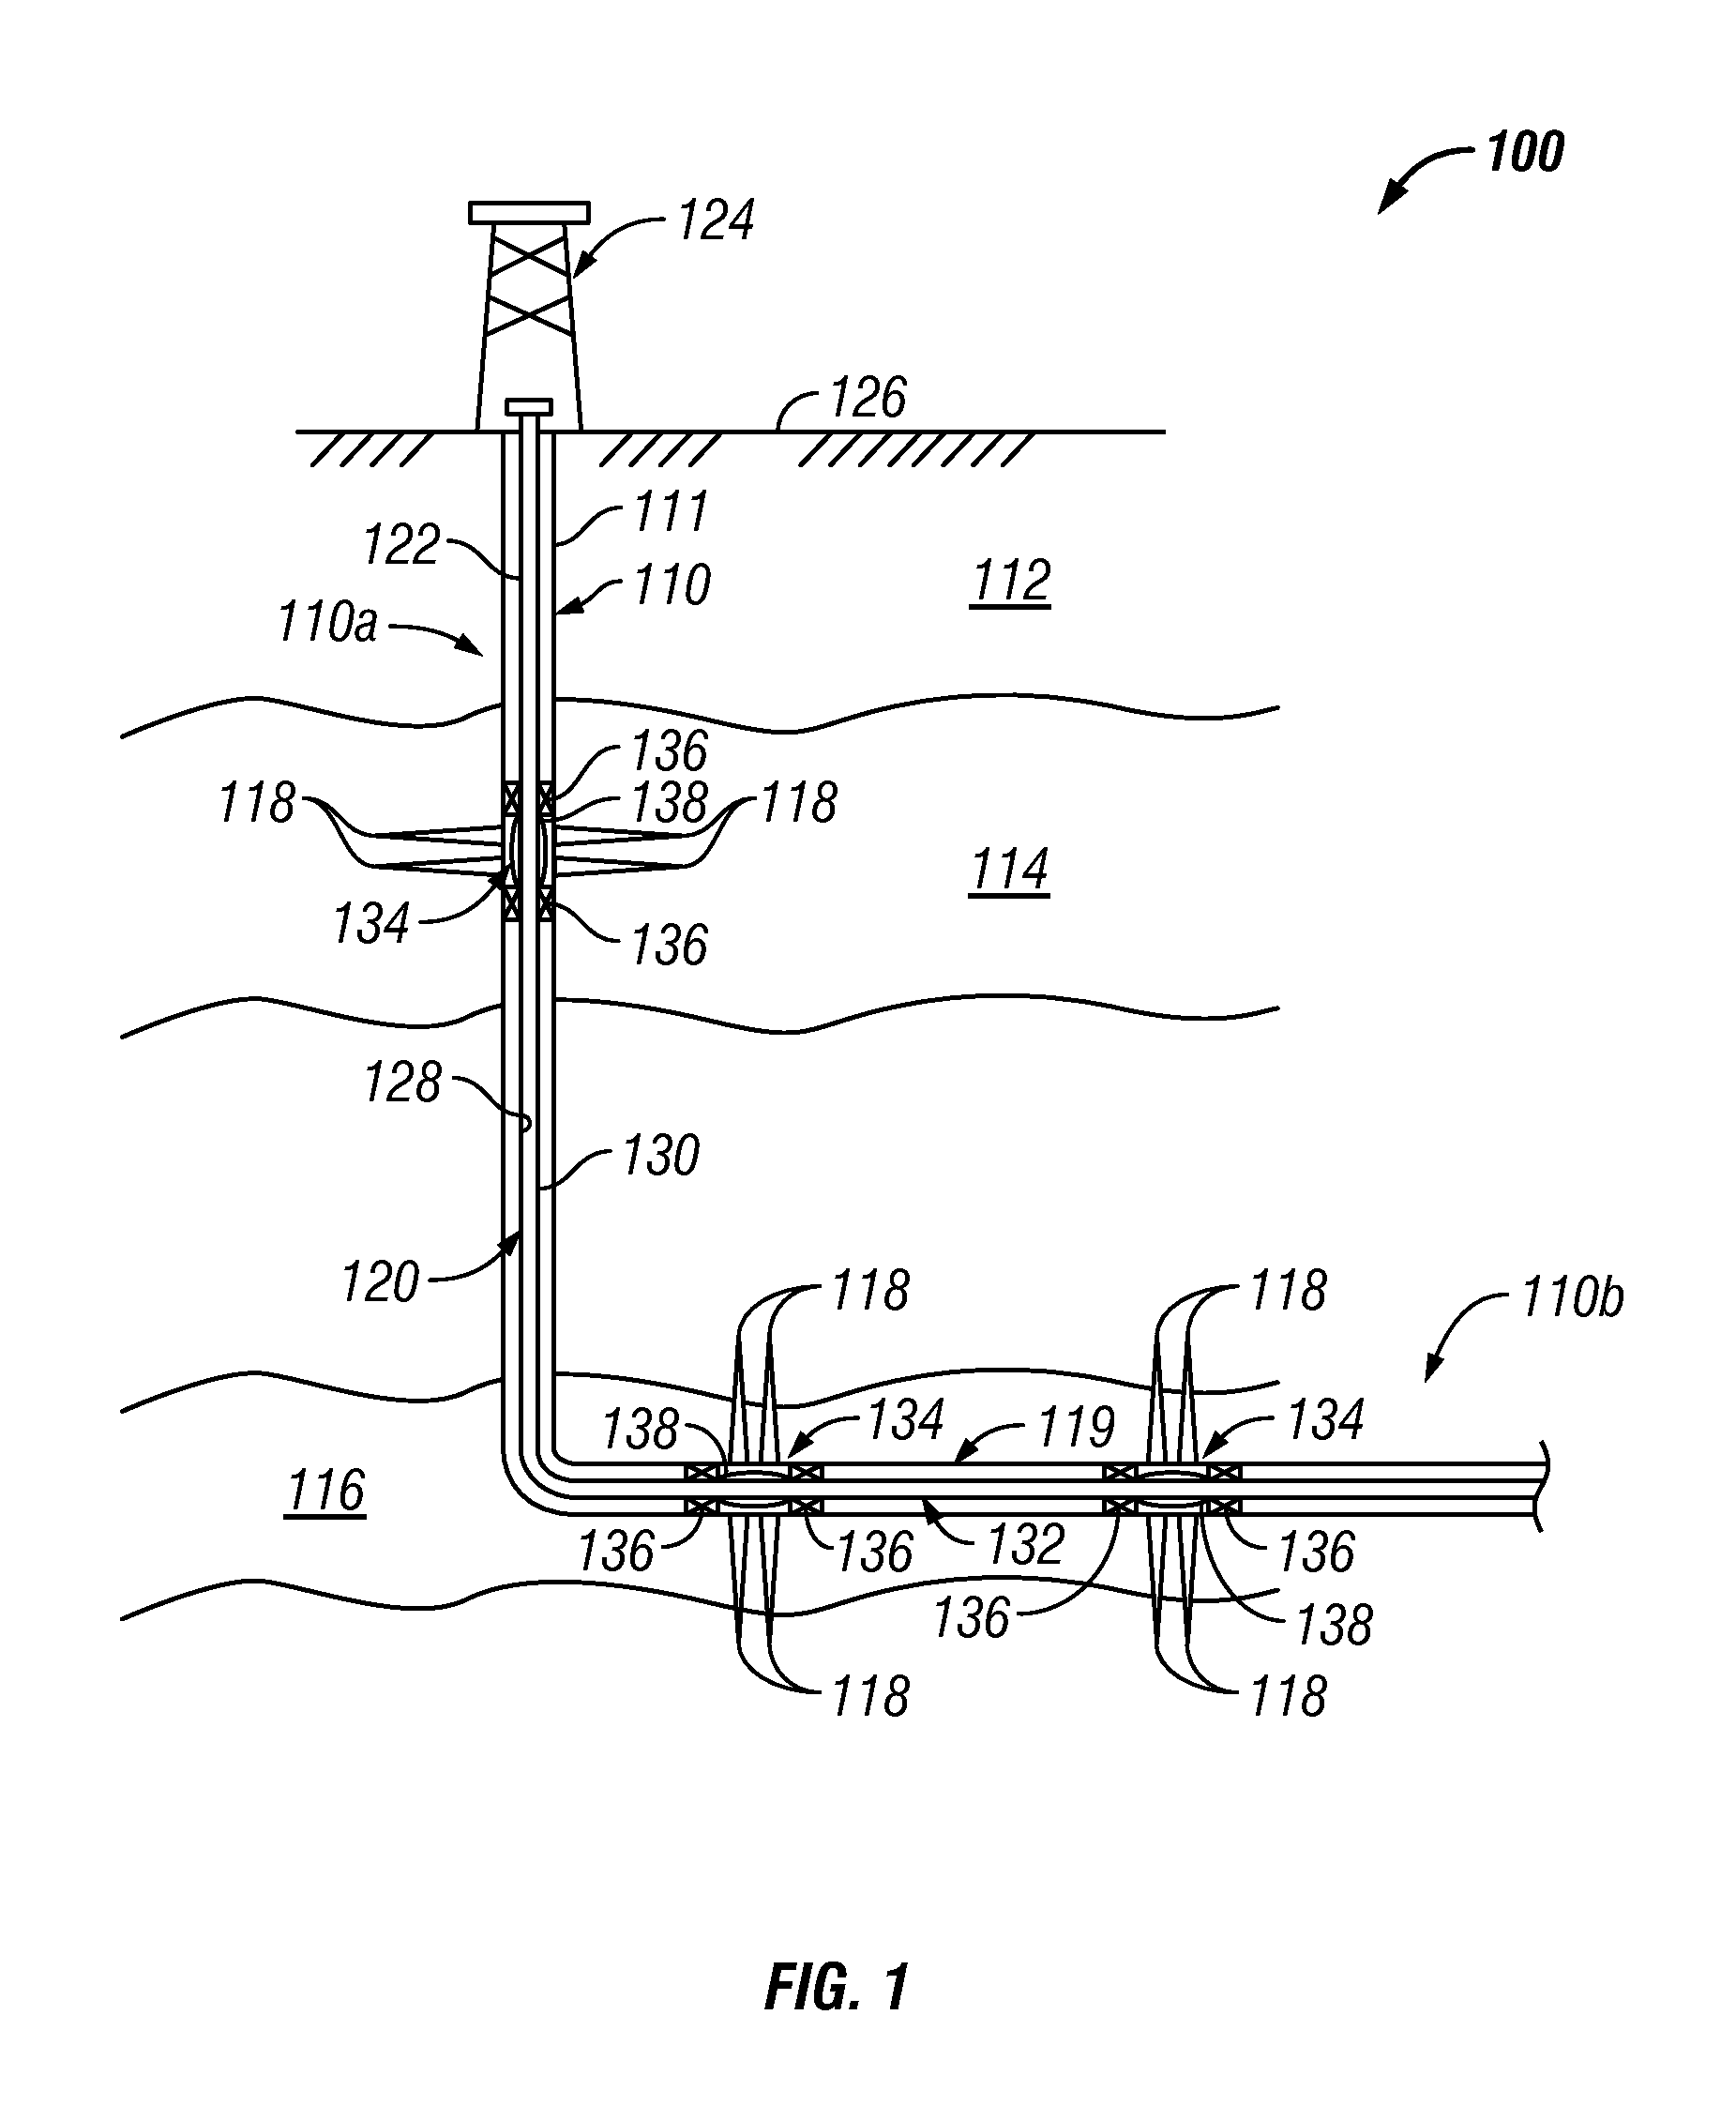 Method of Providing Flow Control Devices for a Production Wellbore